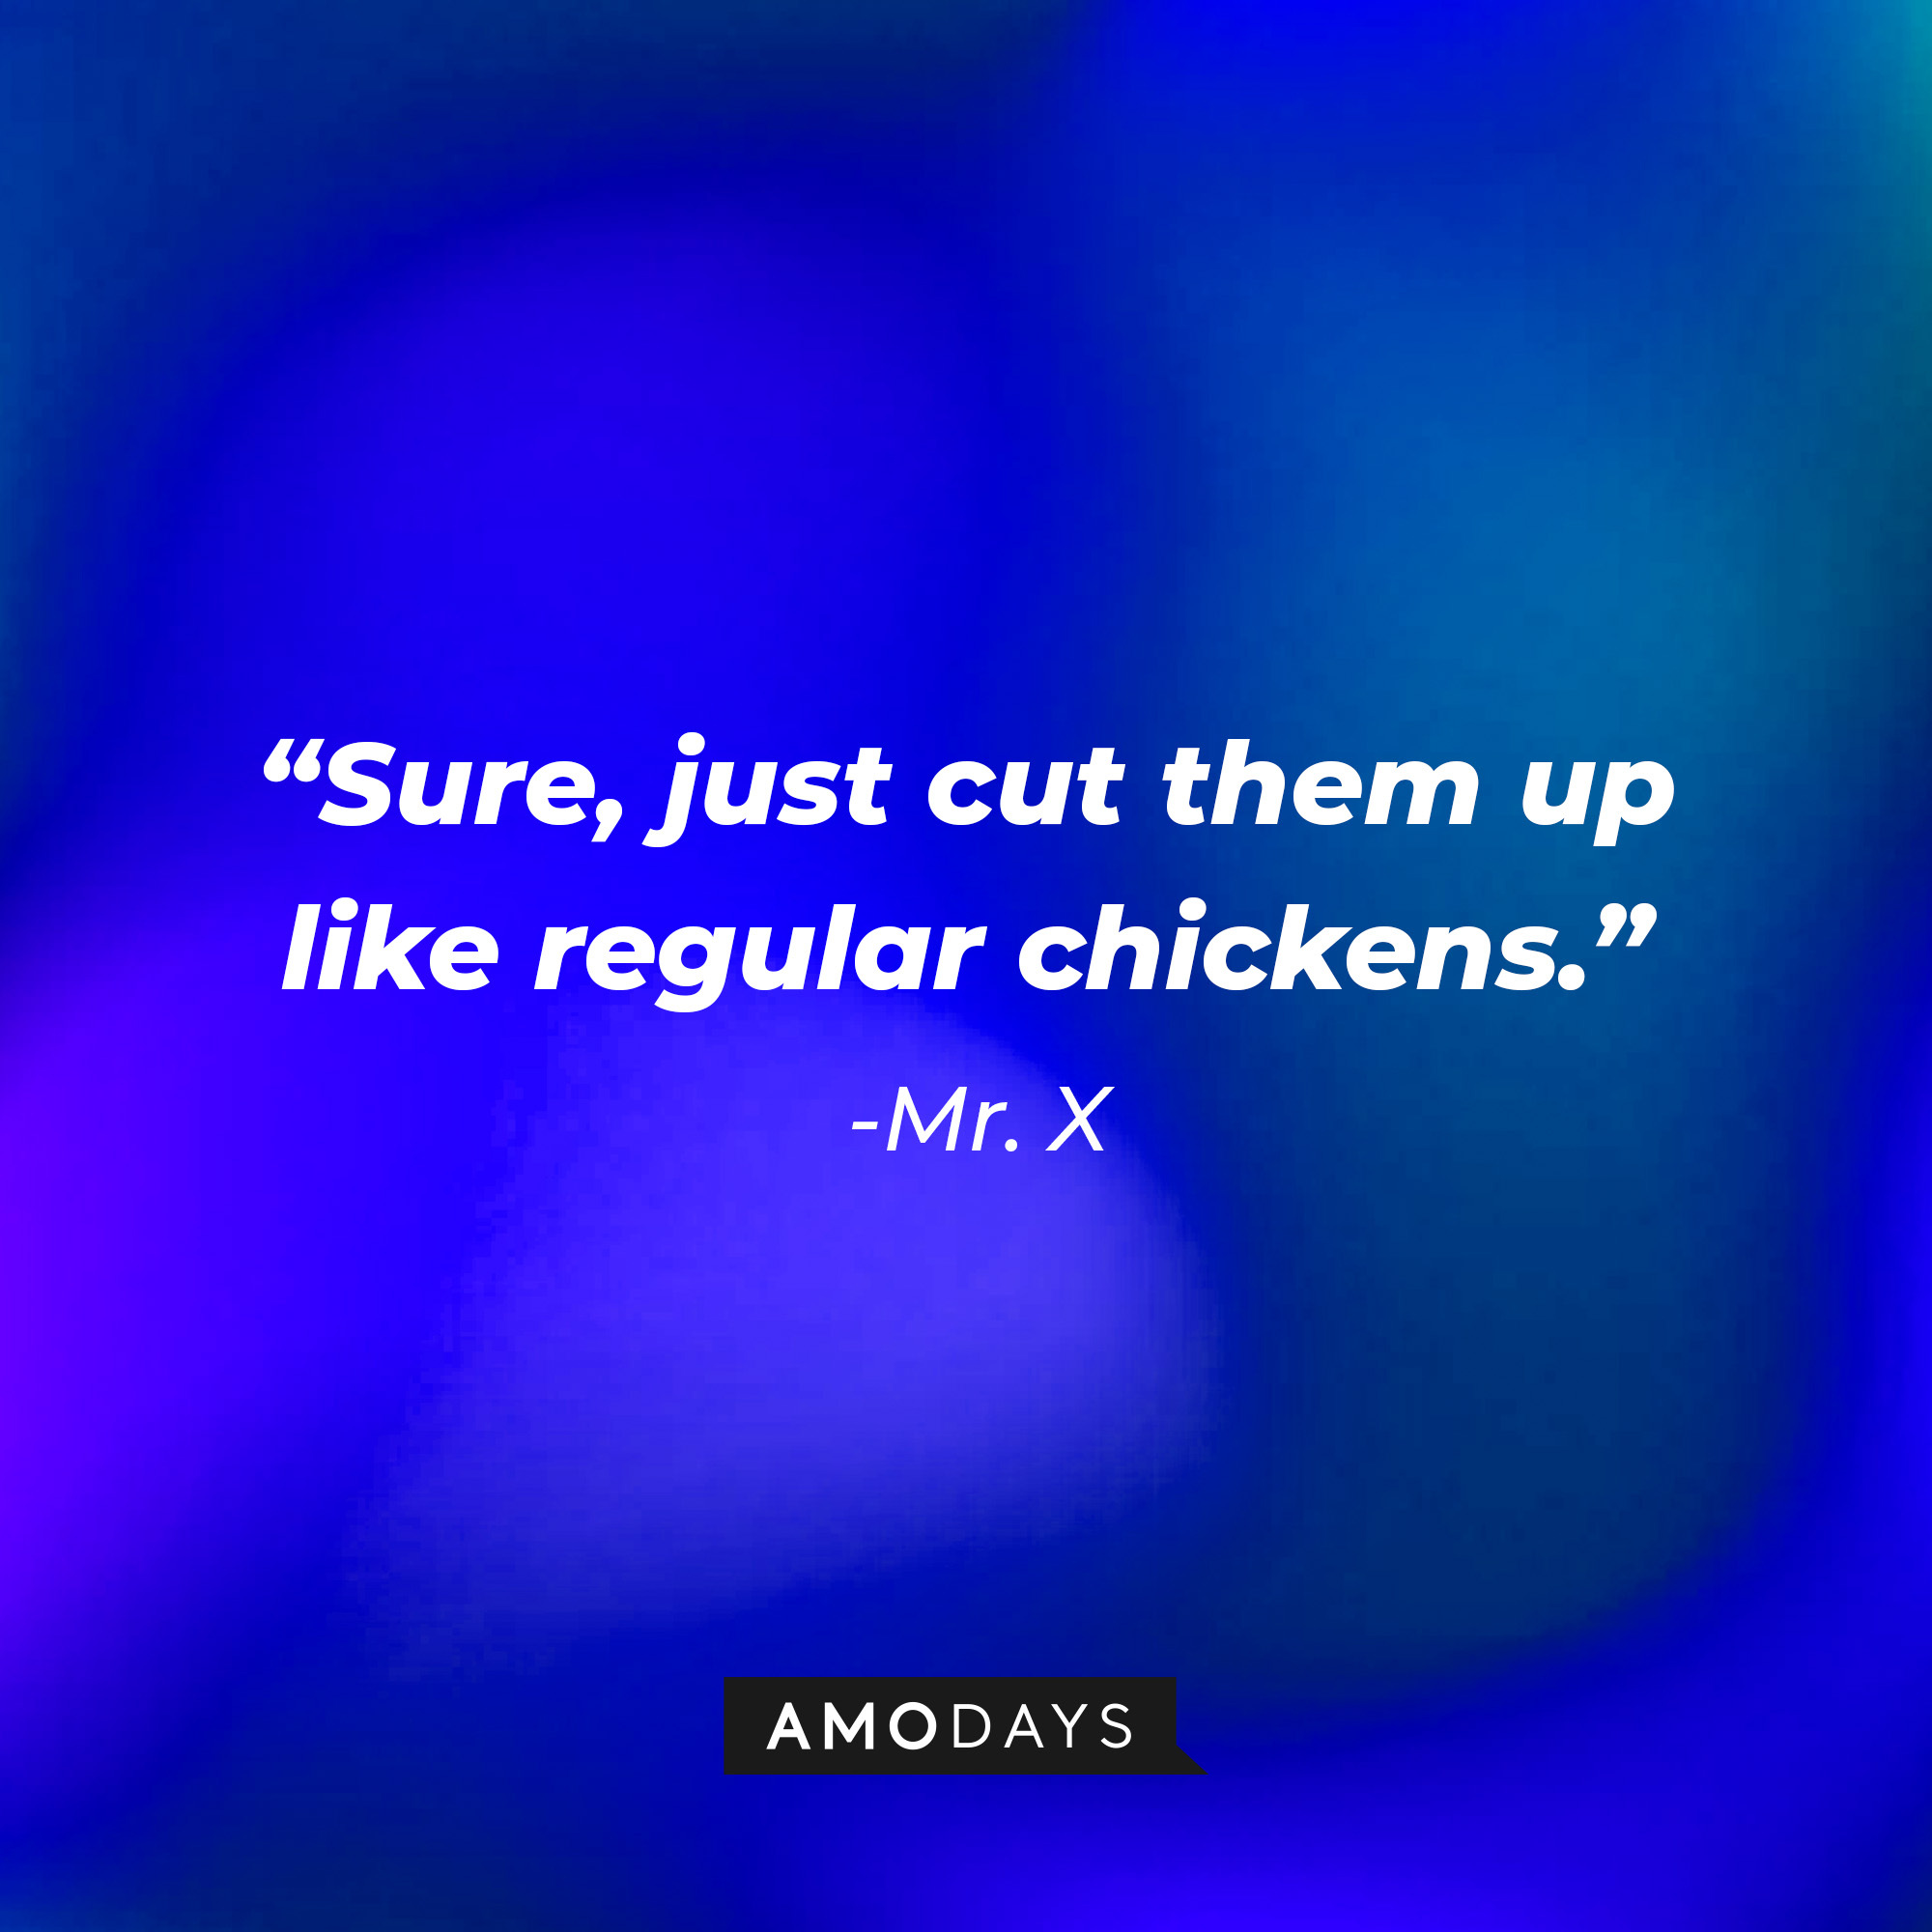 Mr. X’s quote: “Sure, just cut them up like regular chickens.” | Source: AmoDays